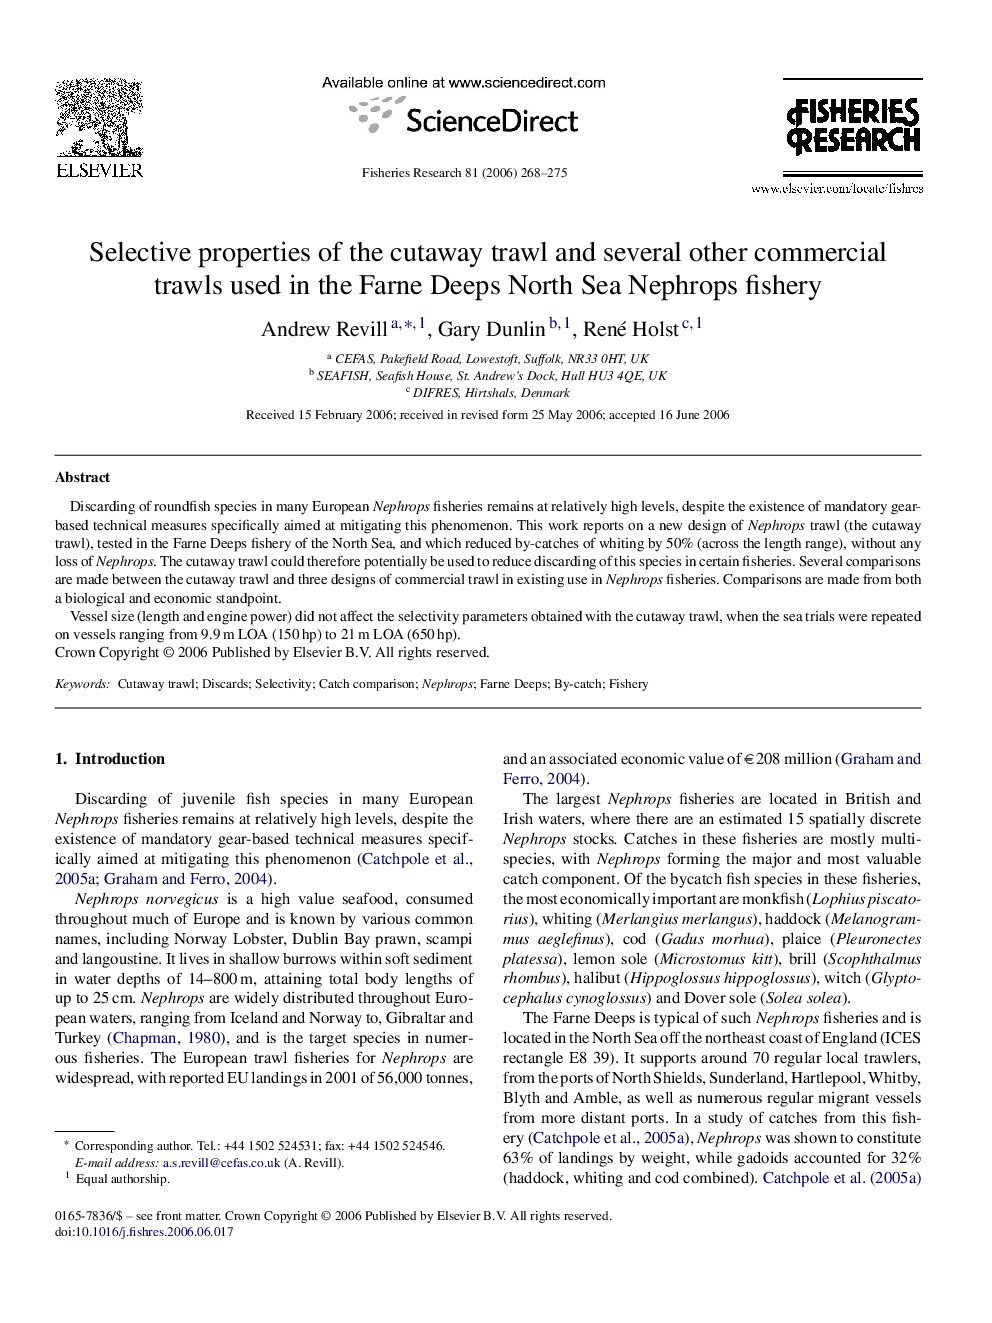 Selective properties of the cutaway trawl and several other commercial trawls used in the Farne Deeps North Sea Nephrops fishery